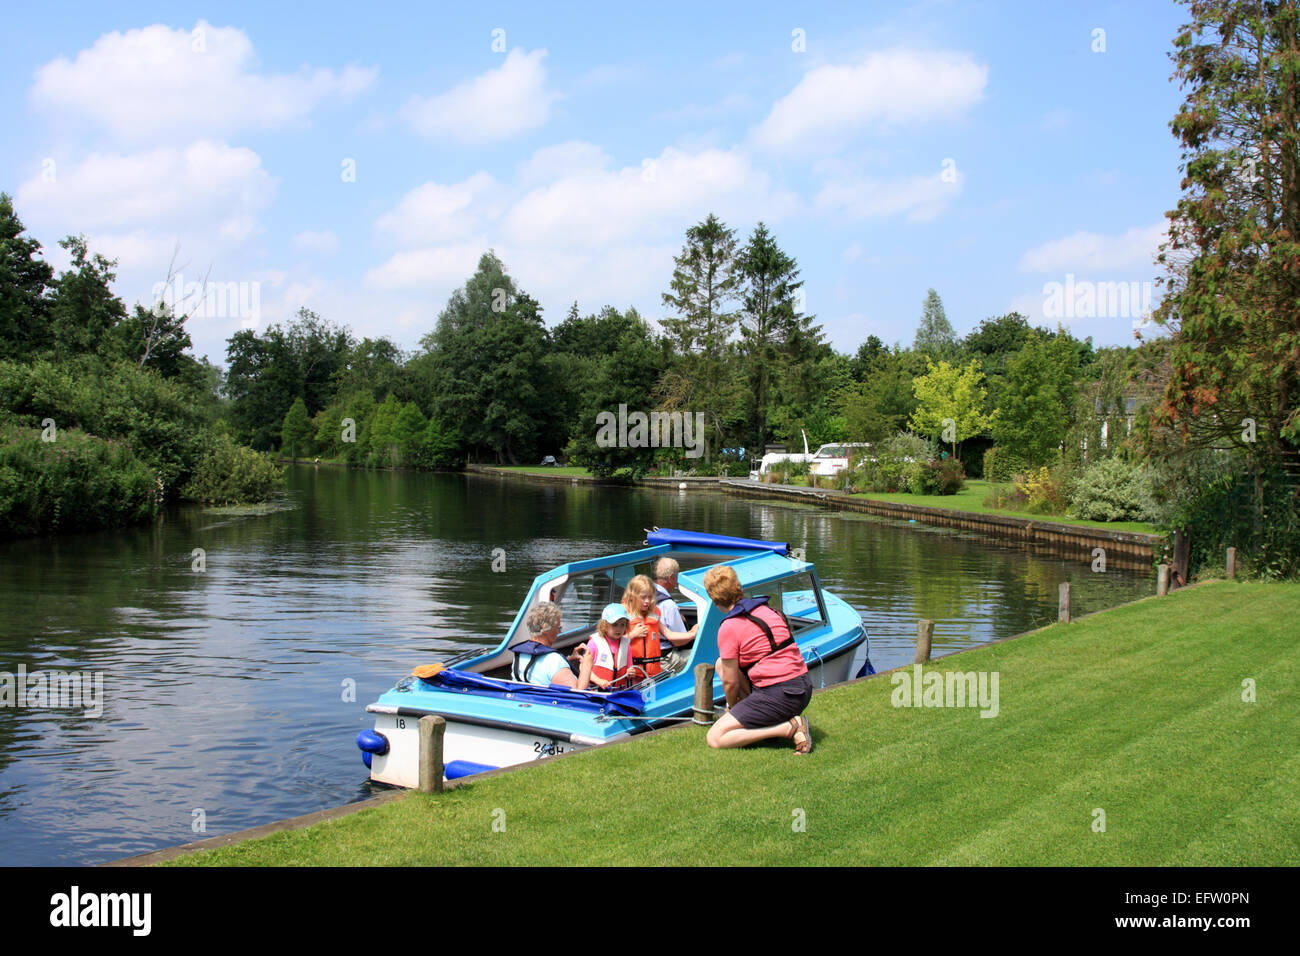 Family outing on a dayboat, seen here moored at Belaugh Staithe on the River Bure, between Hoveton and Coltishall / Norfolk / UK Stock Photo